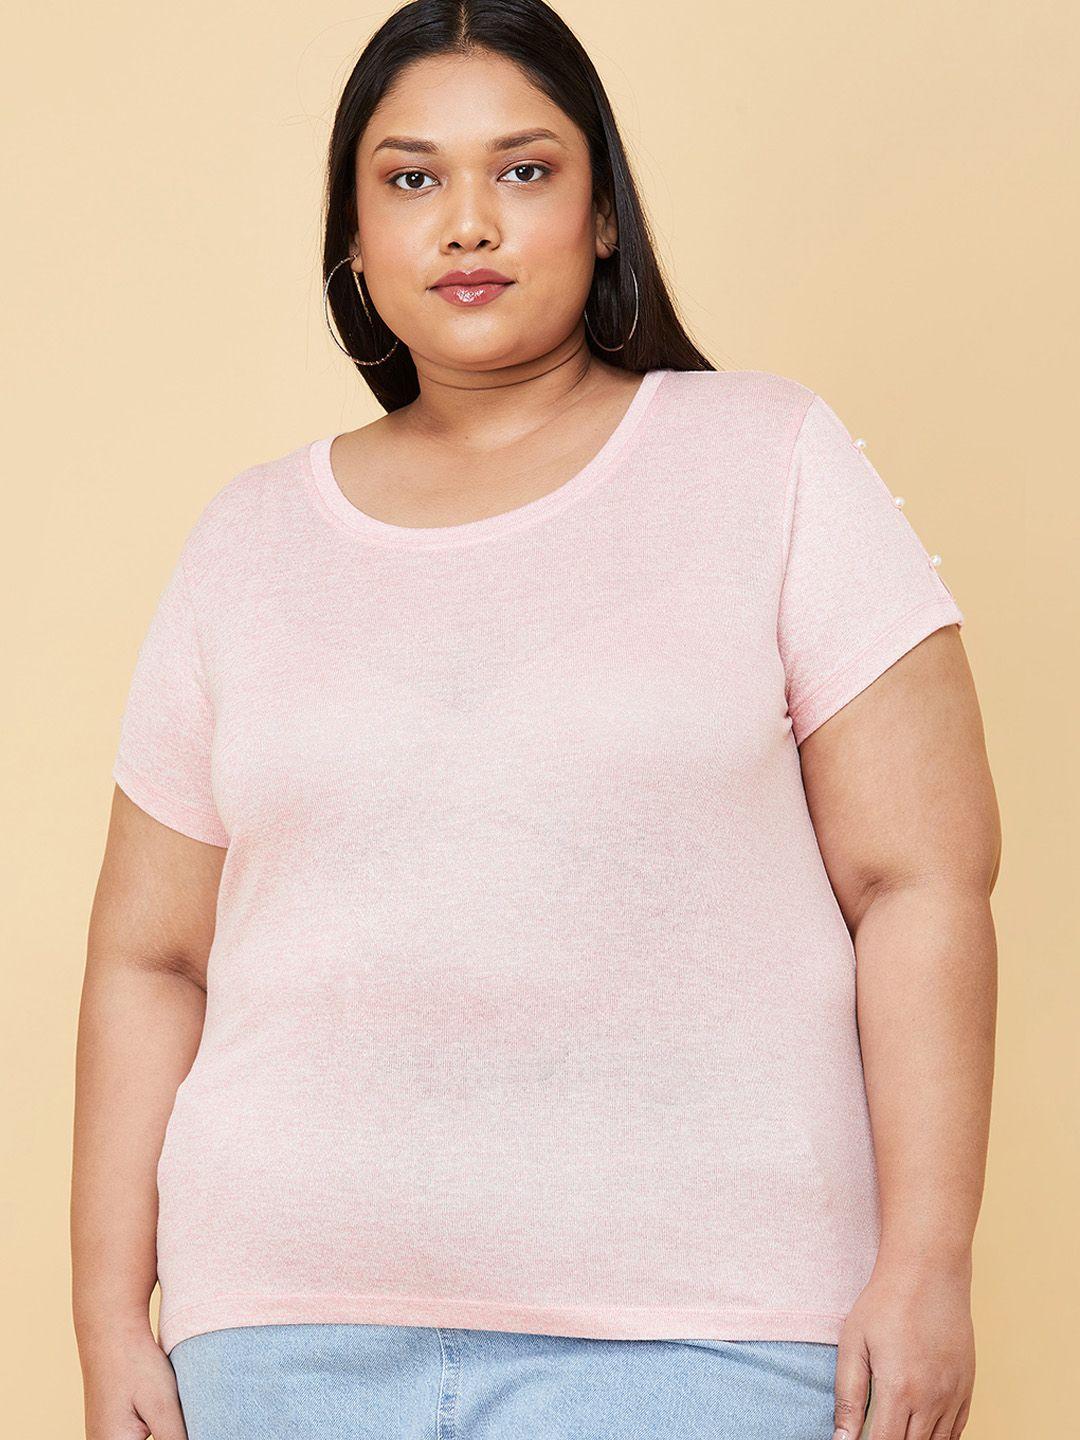 max plus size women pink top